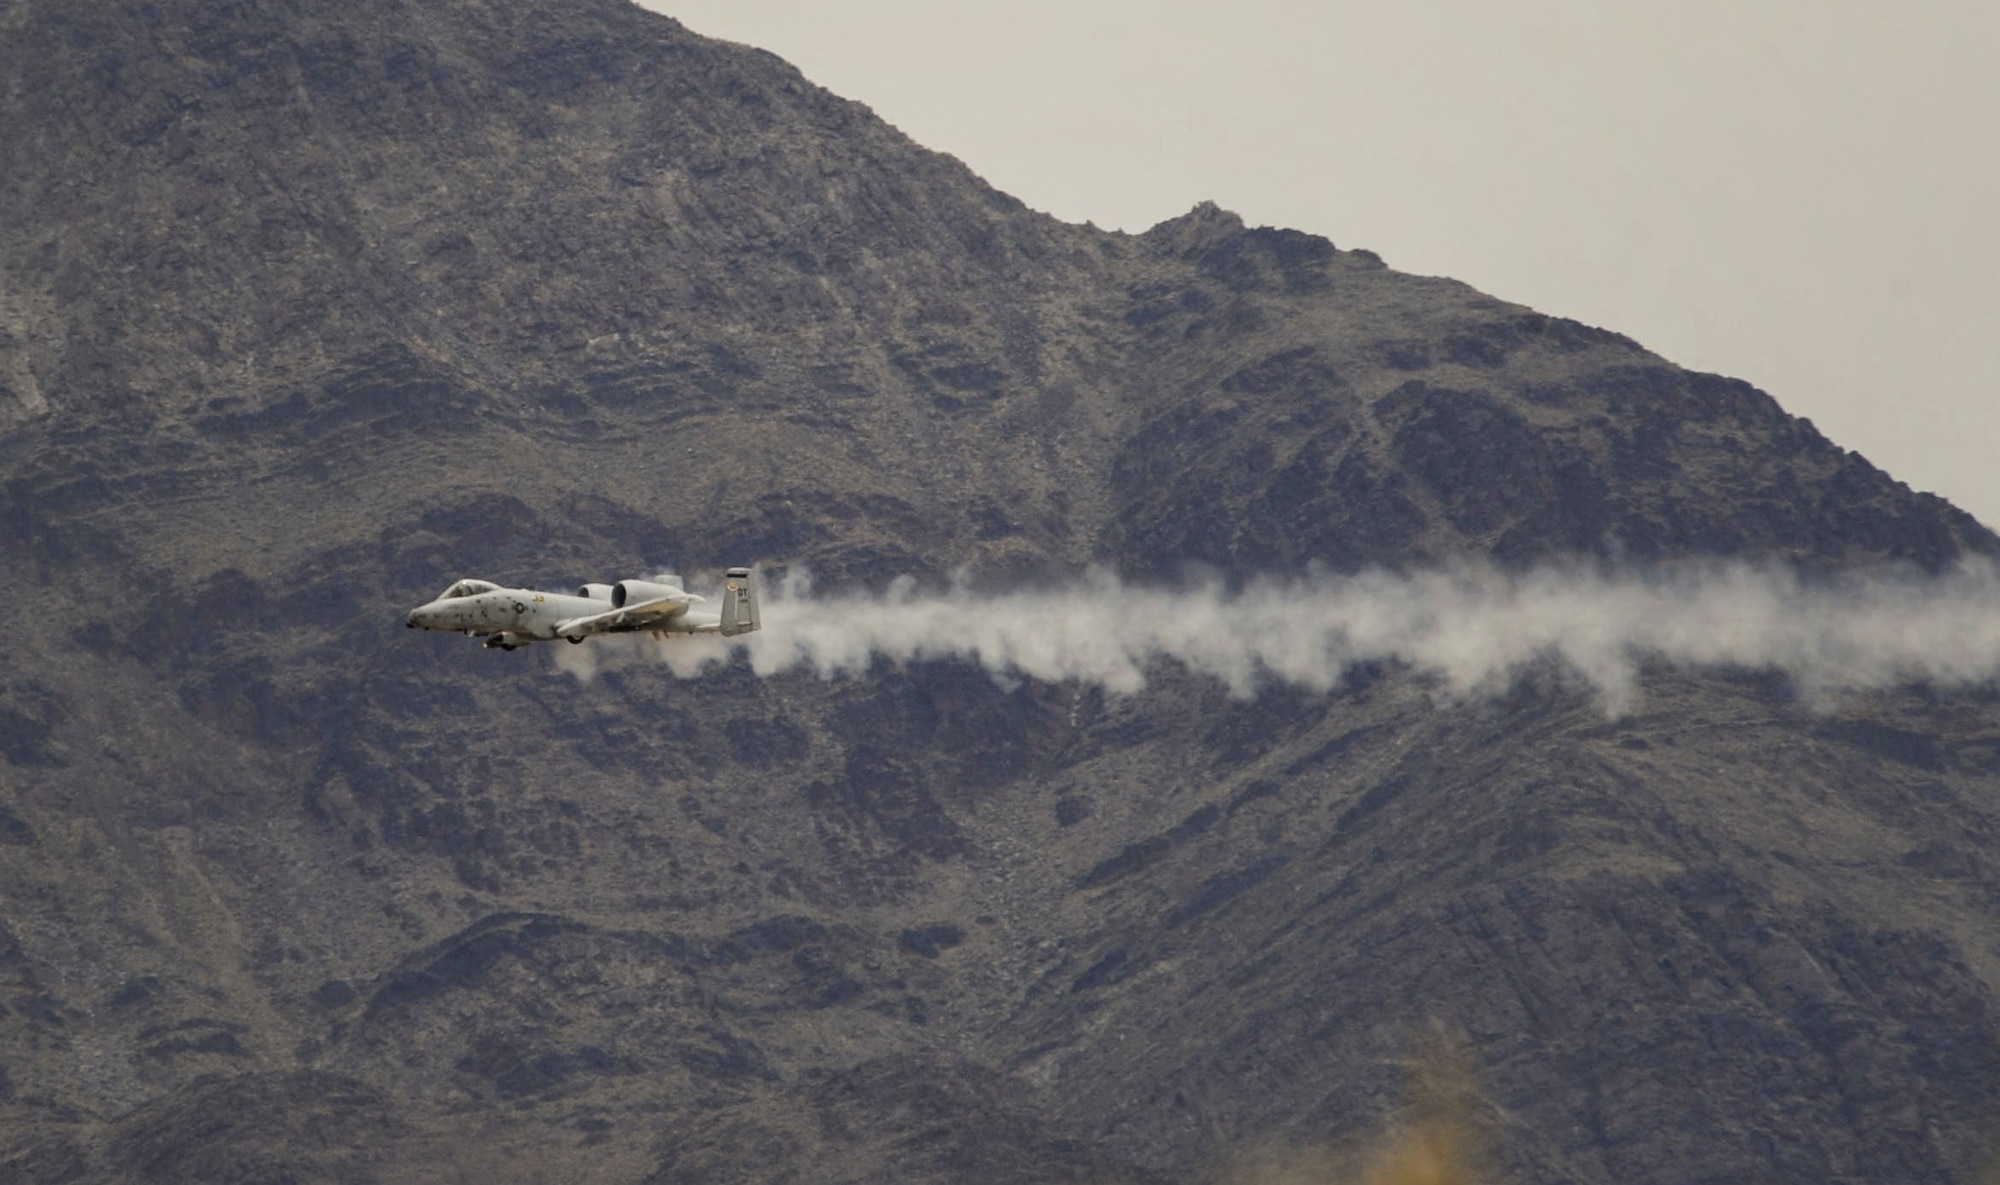 An A-10 Thunderbolt II attack aircraft fires a rotary cannon during a training exercise on the Nevada Test and Training Range July 19, 2017. The A-10 has excellent maneuverability at low air speeds and altitude, and is a highly accurate and survivable weapons-delivery platform. (U.S. Air Force photo by Senior Airman Kevin Tanenbaum/Released)